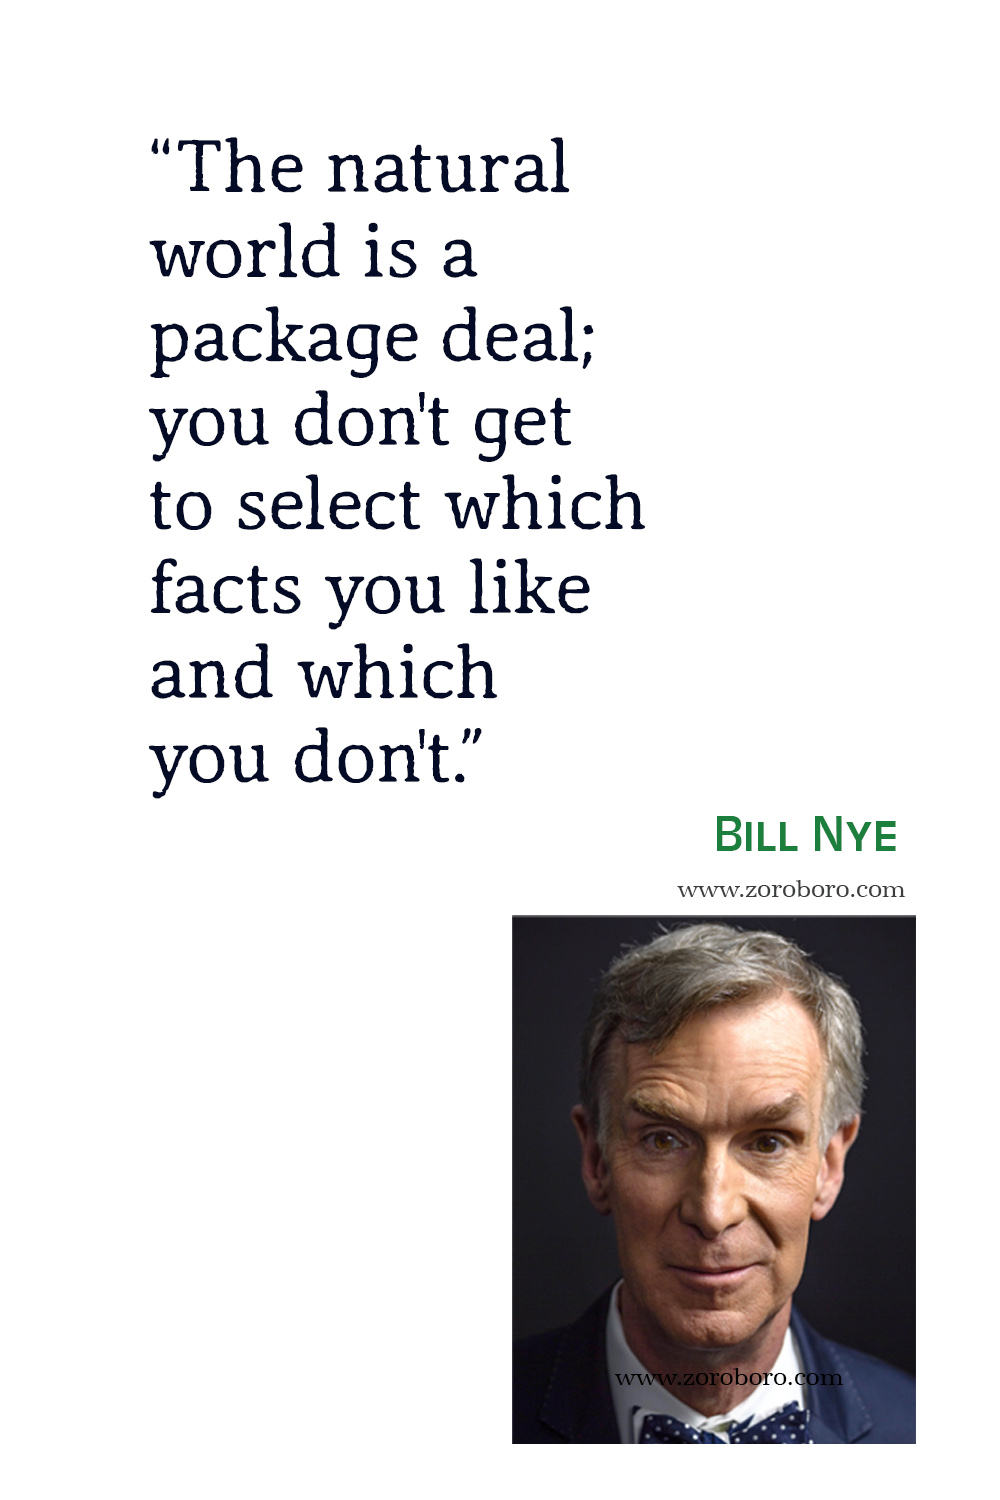 Bill Nye Quotes, Bill Nye Science, Bill Nye Undeniable: Evolution and the Science of Creation, Bill Nye Books, Movies, T.v Shows.